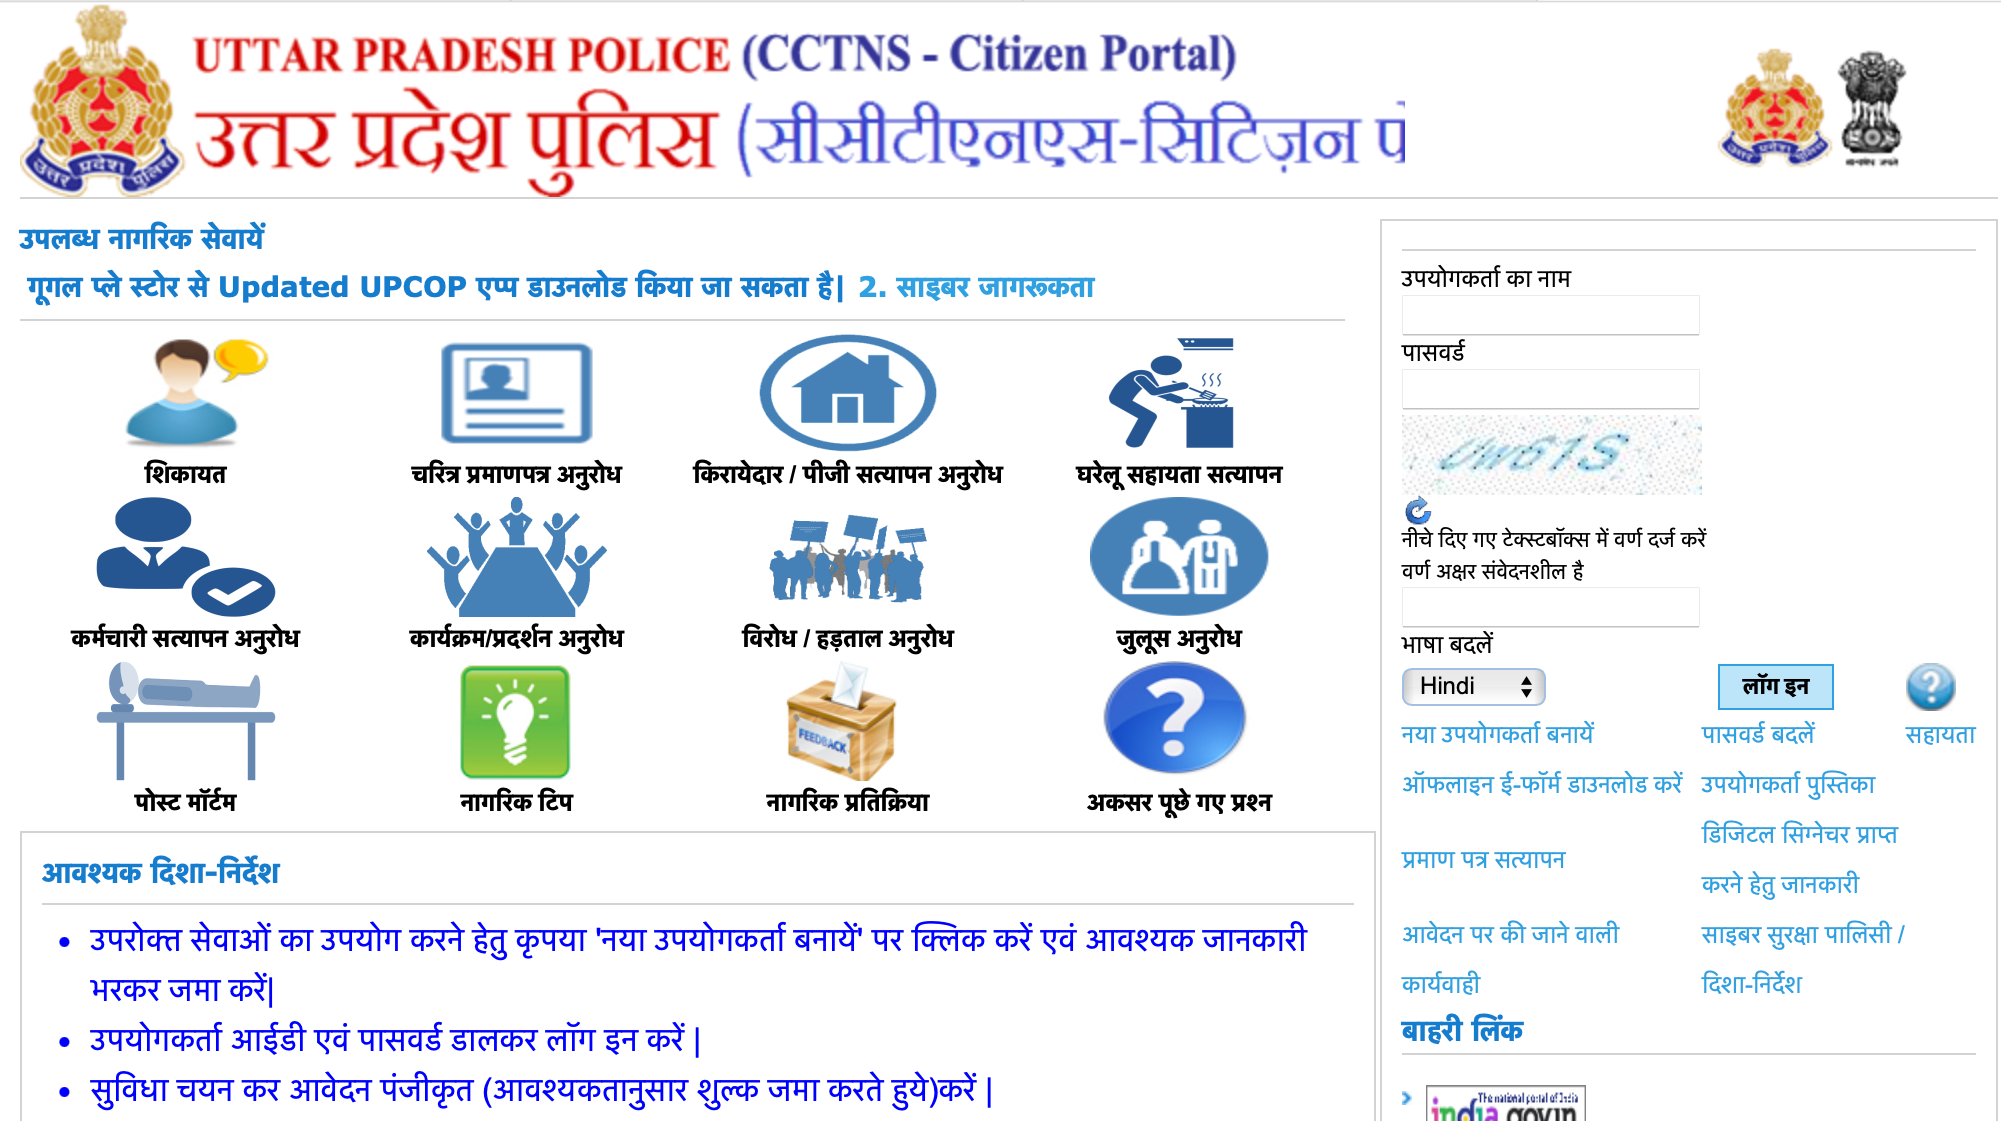 ऑनलाइन चरित्र प्रमाण पत्र कैसे बनवाएँ ? online how to apply for character certifcate ?